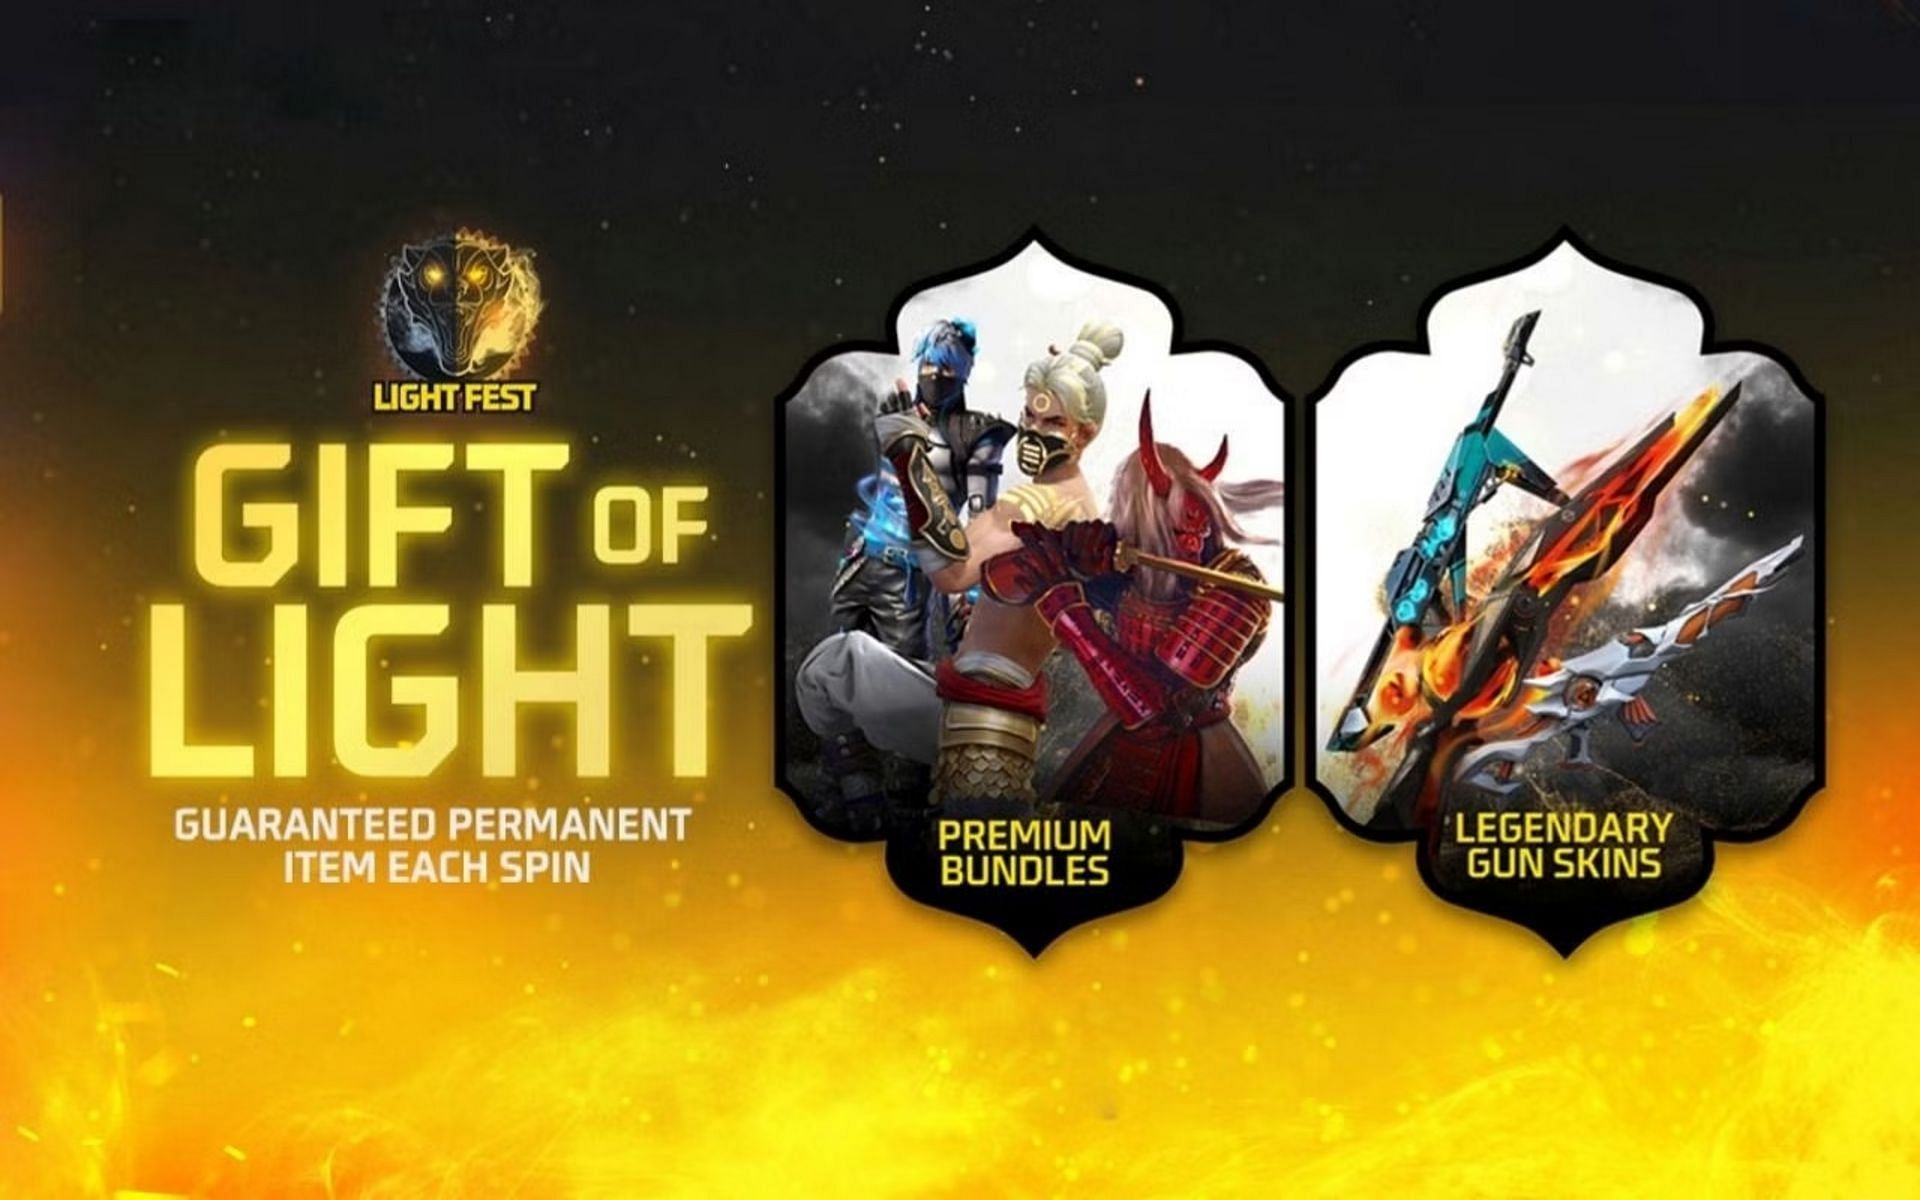 3-best-bundles-and-gun-skins-in-free-fire-max-gift-of-light-event